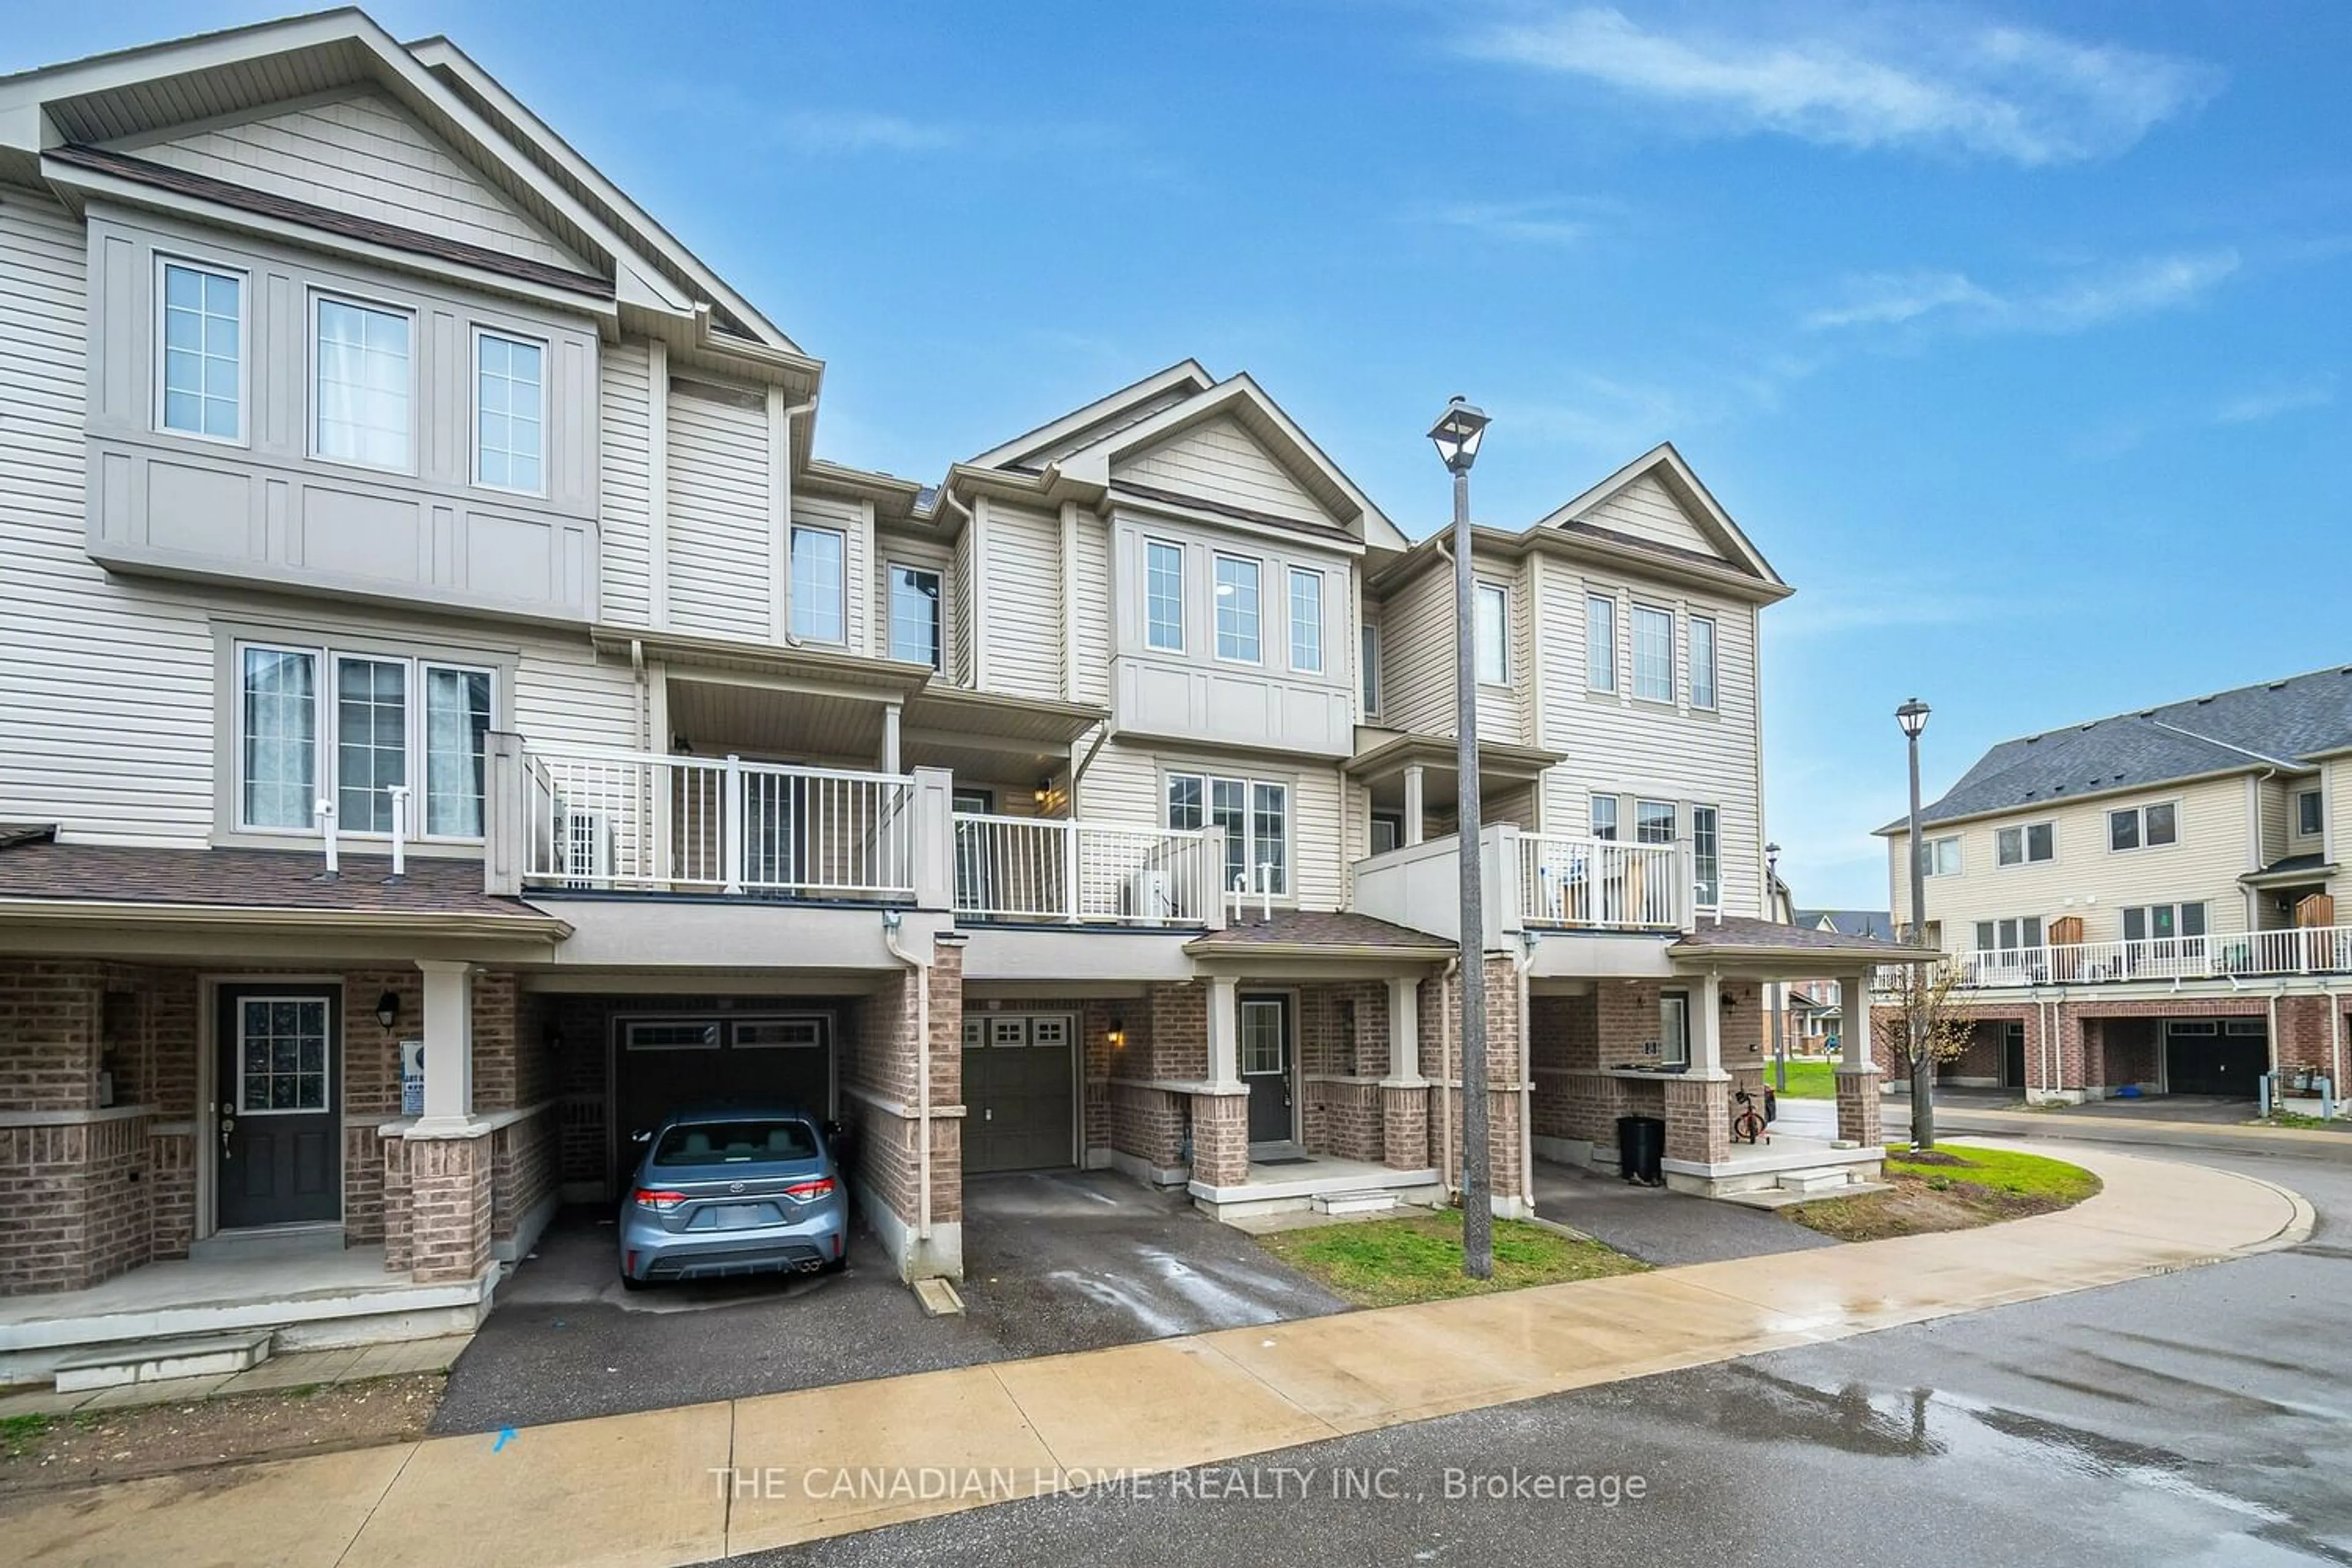 A pic from exterior of the house or condo for 420 Linden Dr #41, Cambridge Ontario N3H 0C6